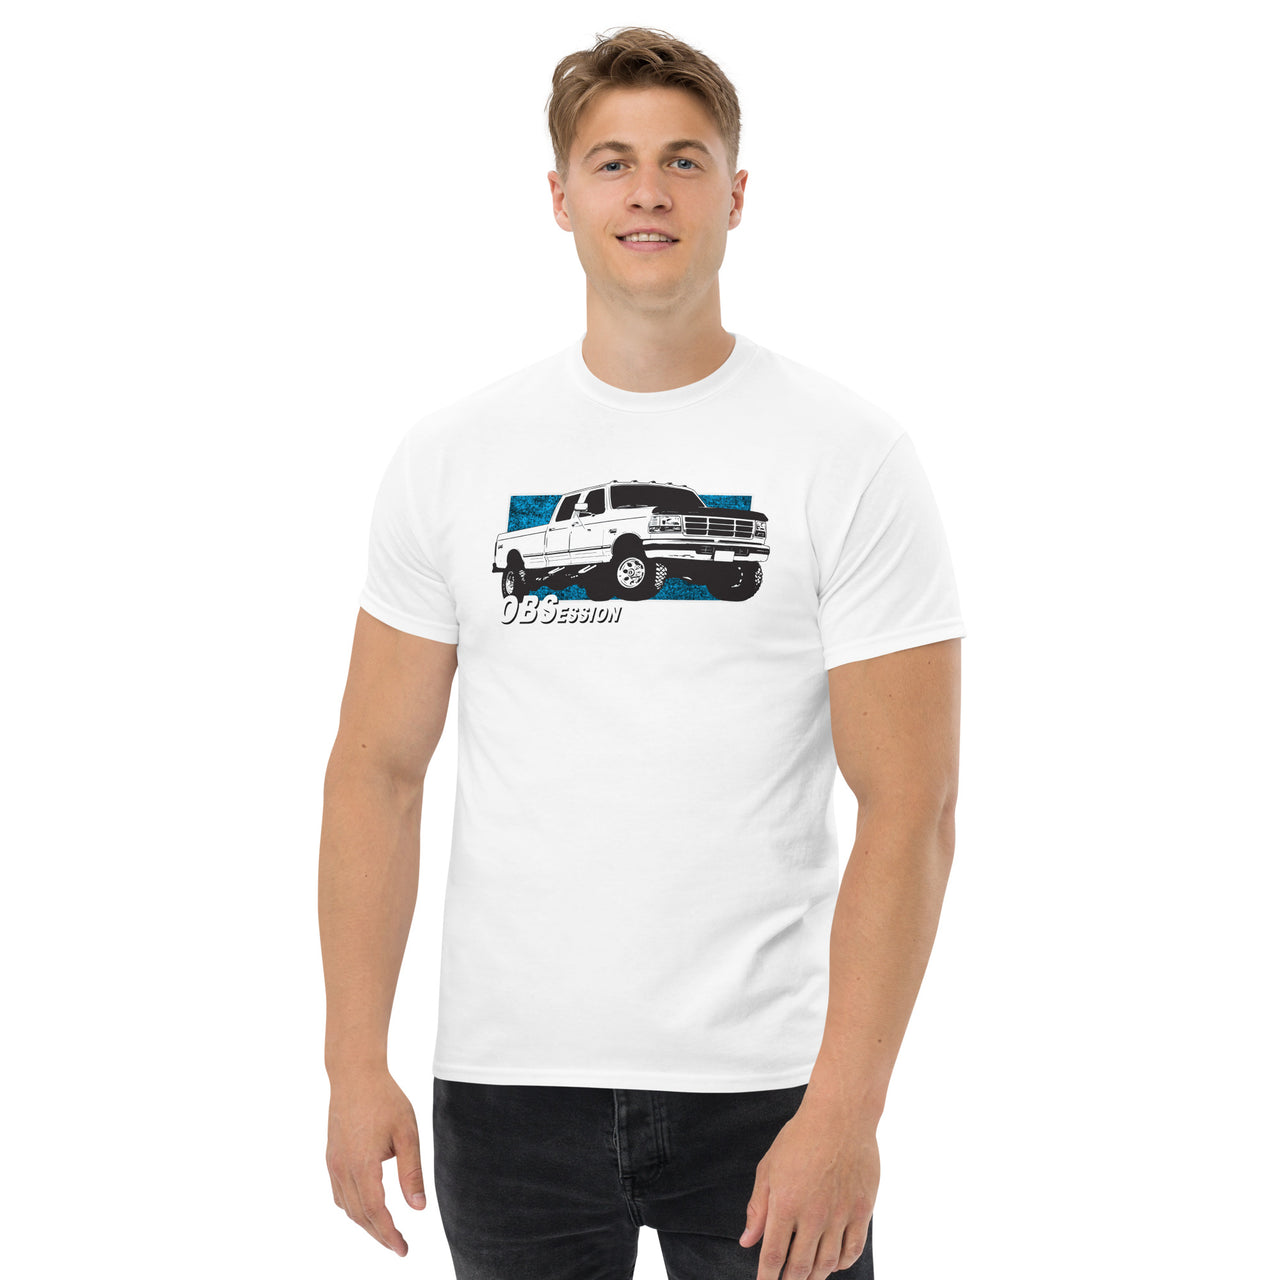 OBS T-Shirt - Crew Cab OBSession - modeled in black